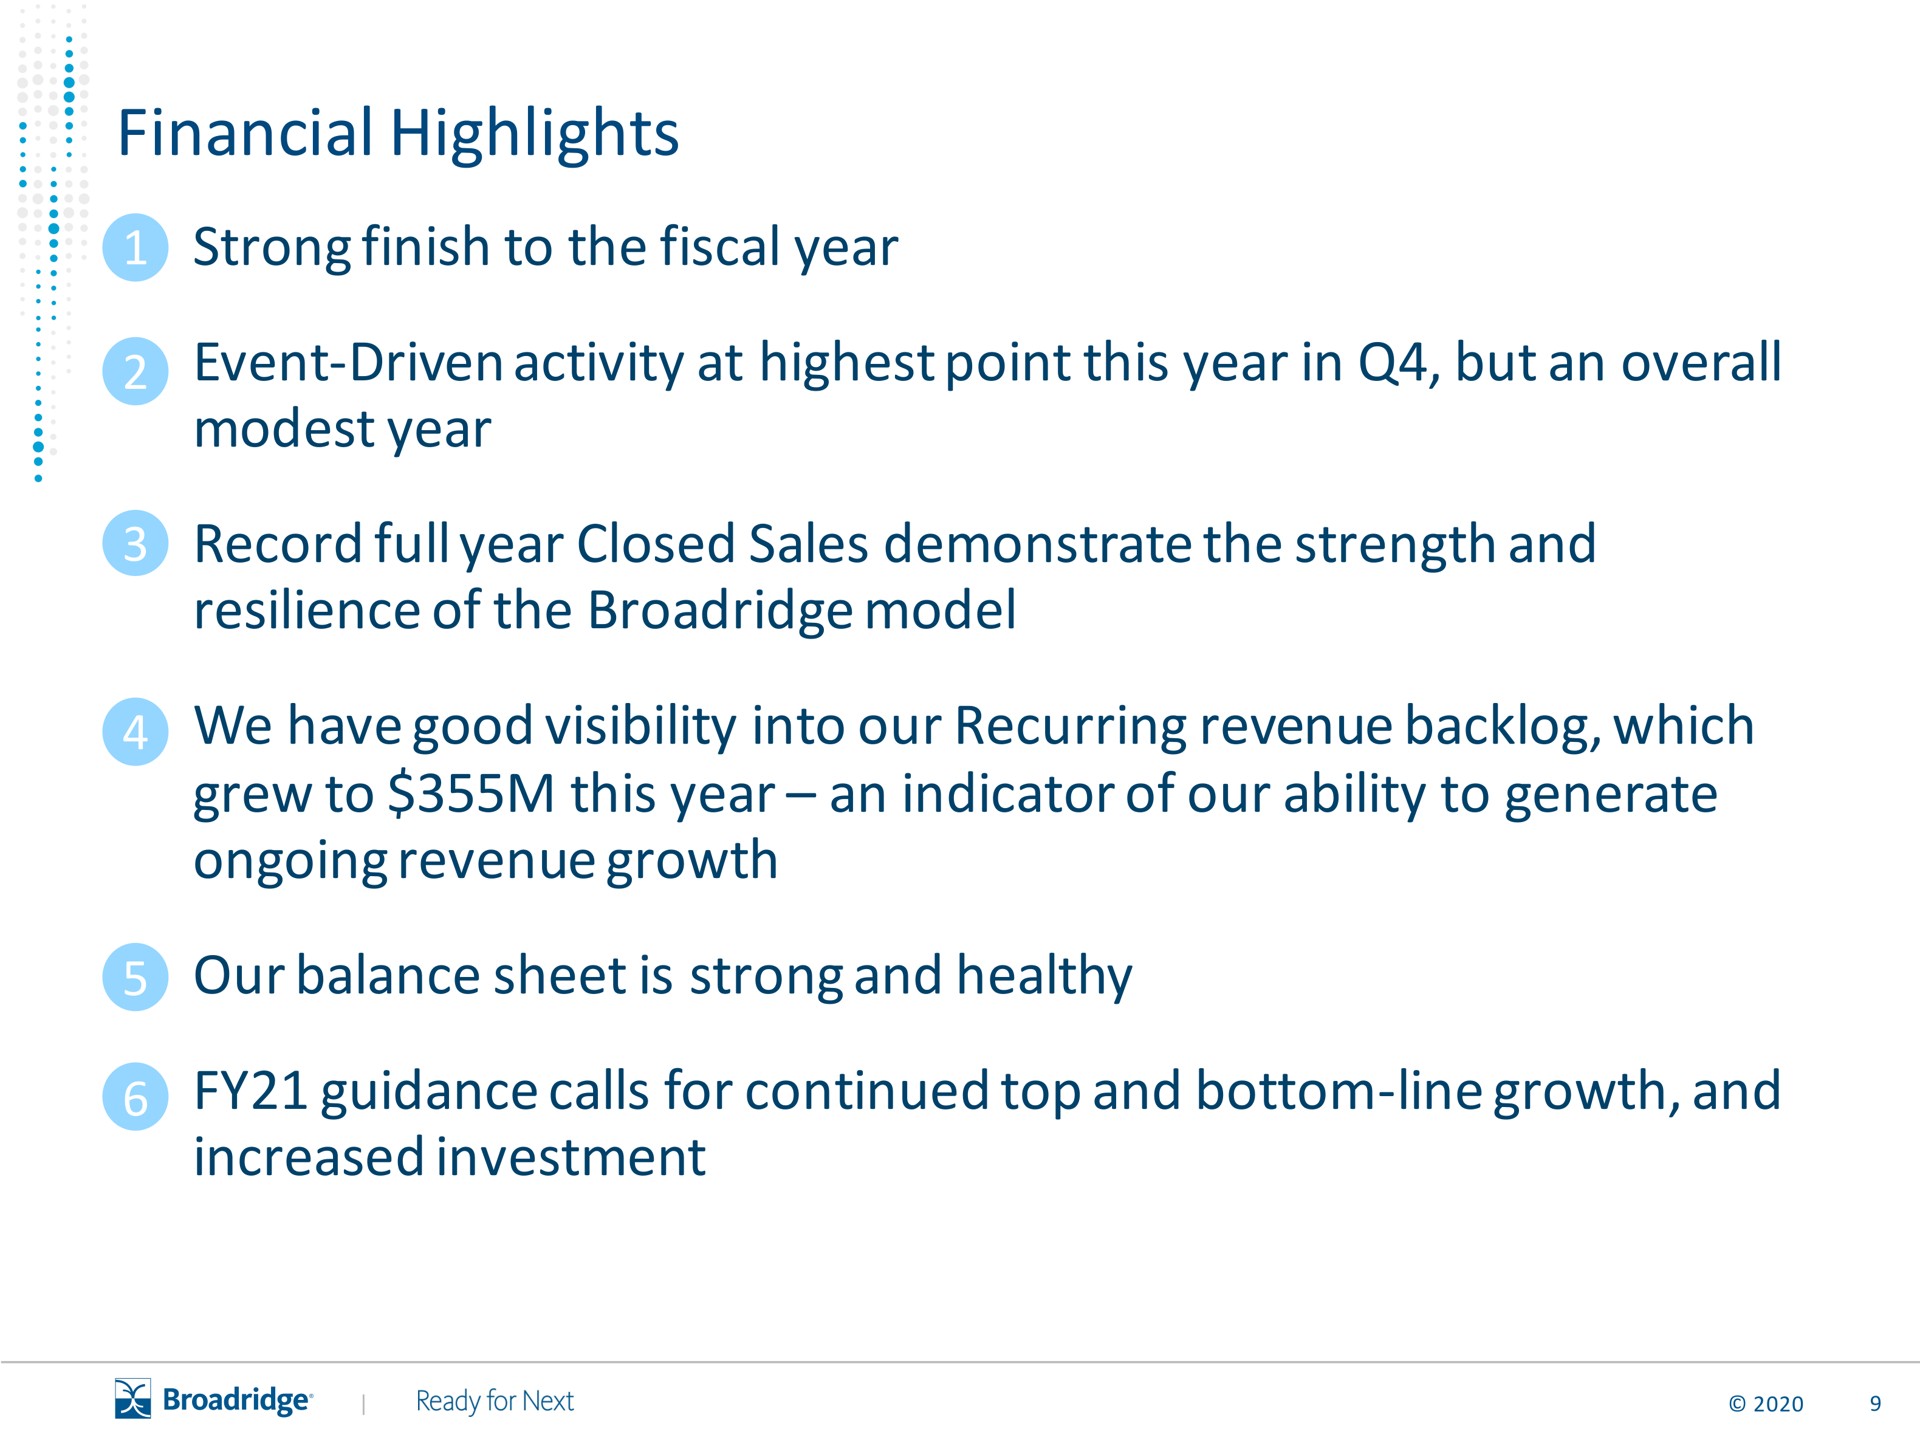 financial highlights strong finish to the fiscal year event driven activity at highest point this year in but an overall modest year record full year closed sales demonstrate the strength and resilience of the model we have good visibility into our recurring revenue backlog which grew to this year an indicator of our ability to generate ongoing revenue growth our balance sheet is strong and healthy guidance calls for continued top and bottom line growth and increased investment | Broadridge Financial Solutions